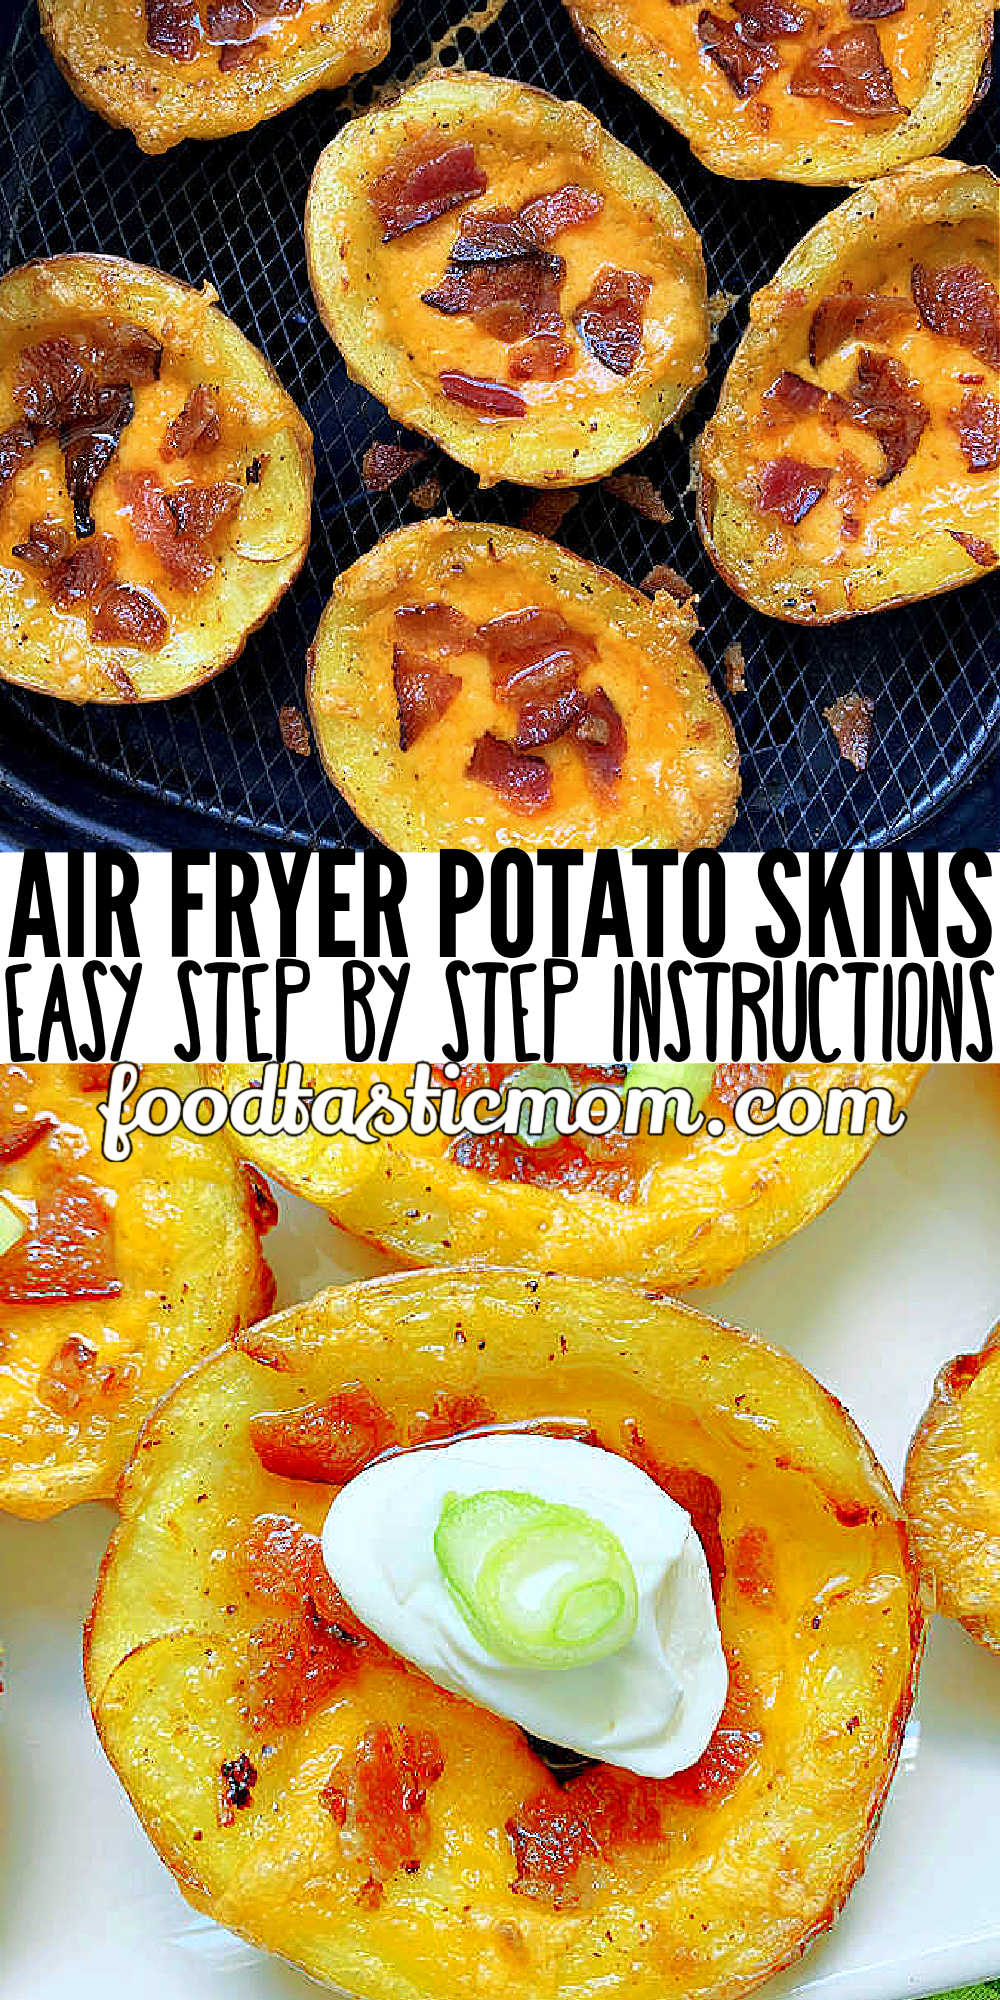 These Air Fryer Potato Skins are even better than restaurant skins. Start in the microwave and brush with bacon fat - then the air fryer makes them perfect! via @foodtasticmom